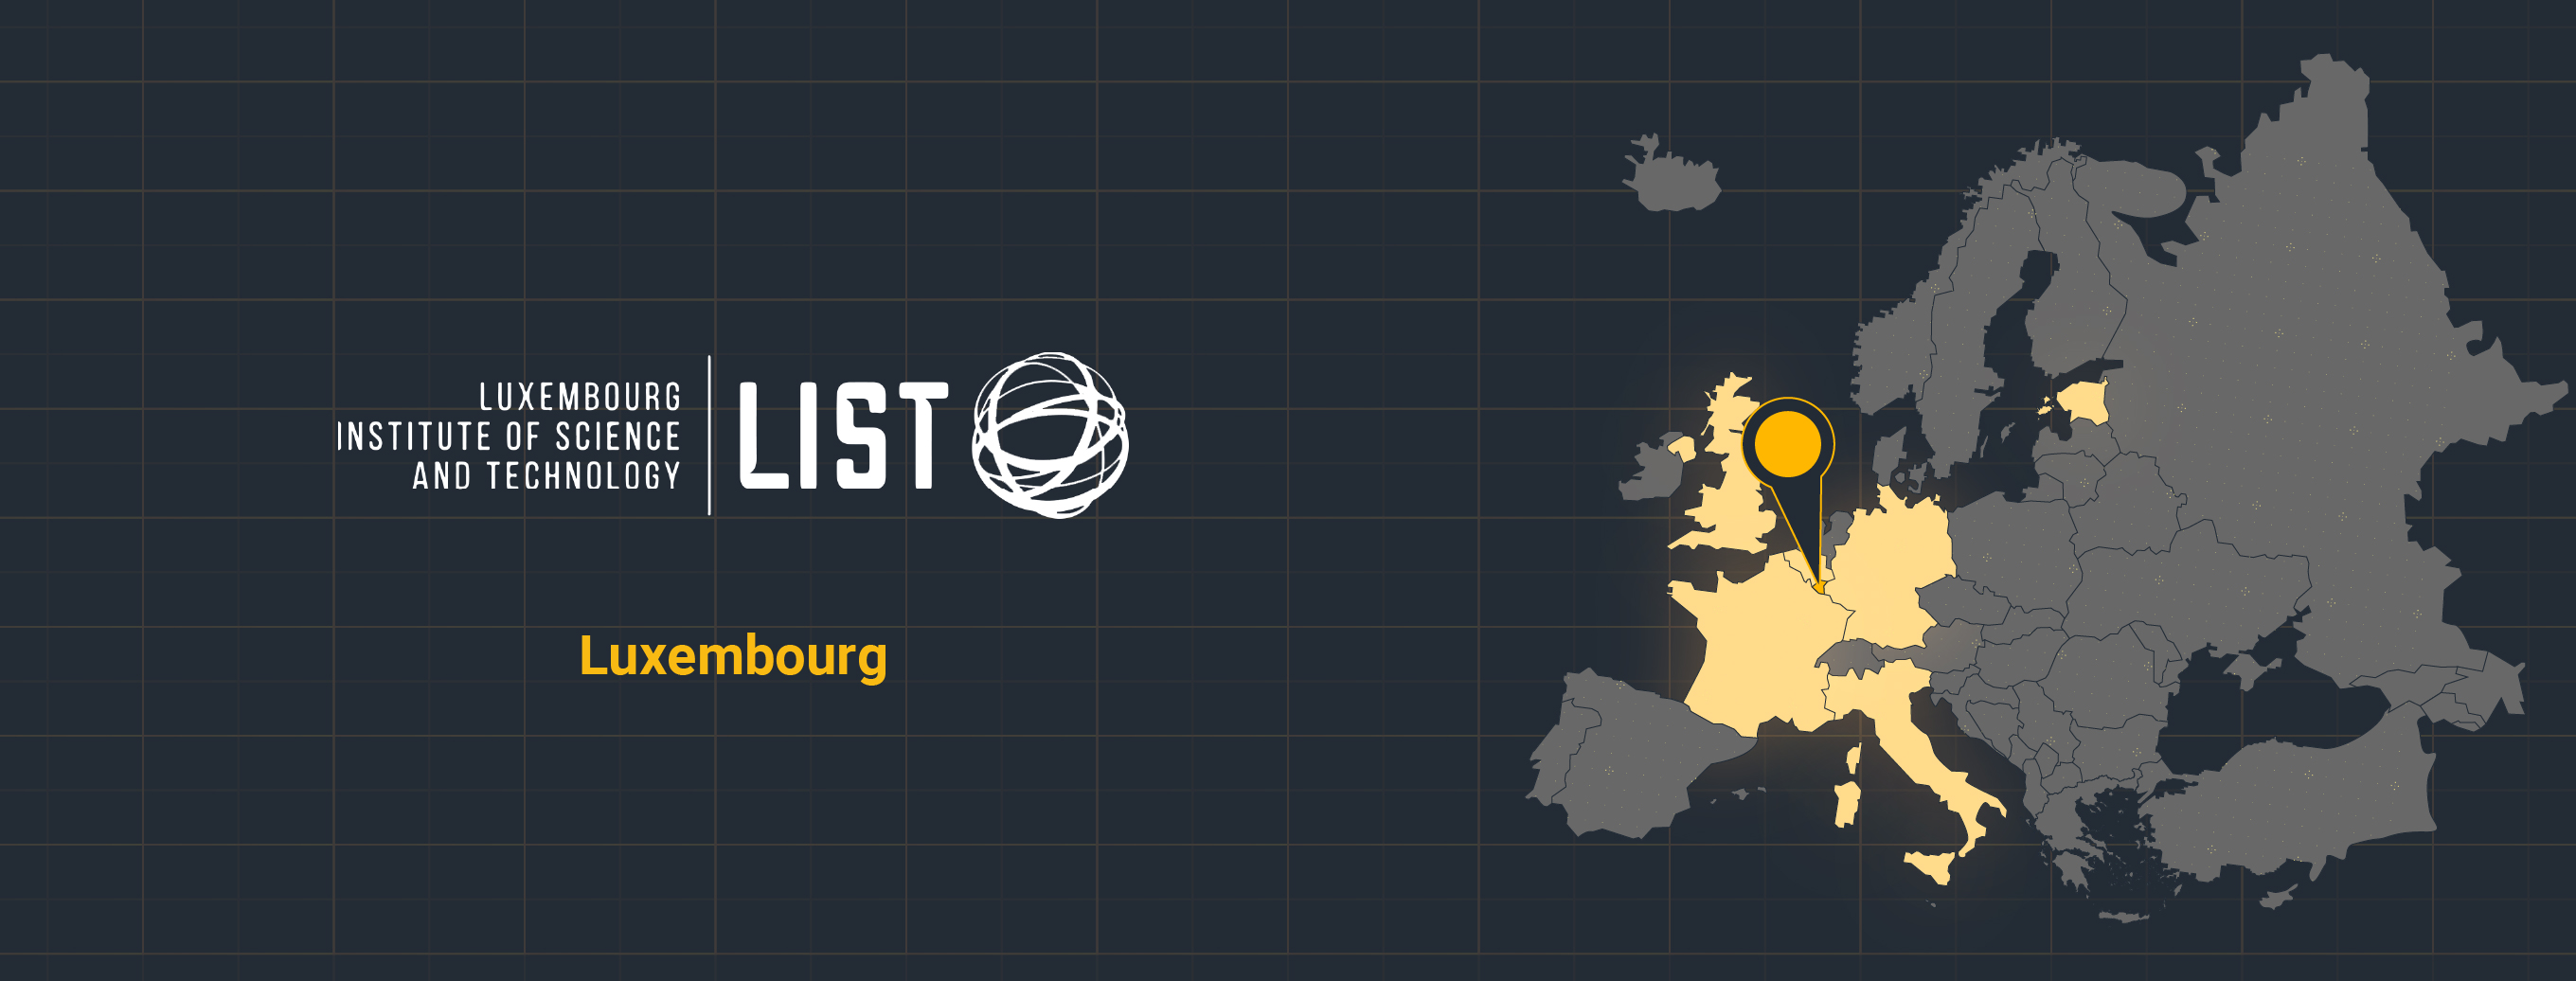 LIST map highlights Luxembourg